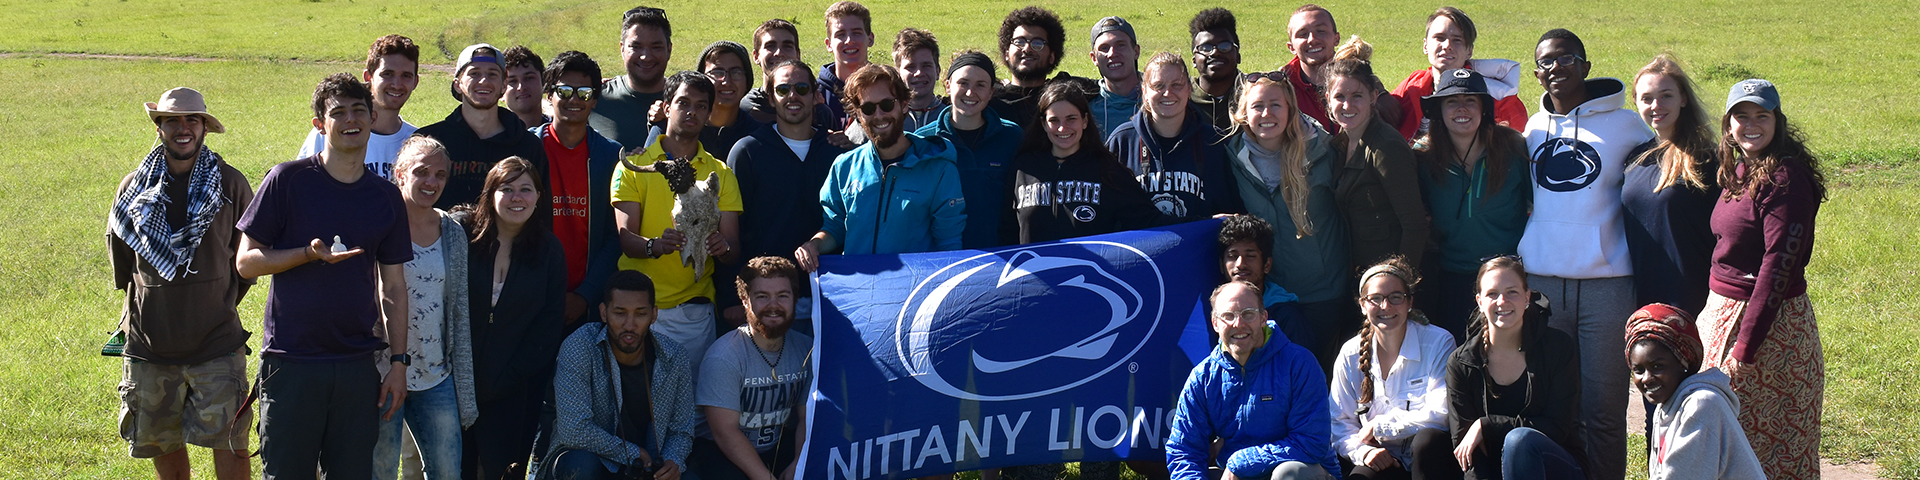 Group of people hold a flag with the Penn State Athletics logo on it